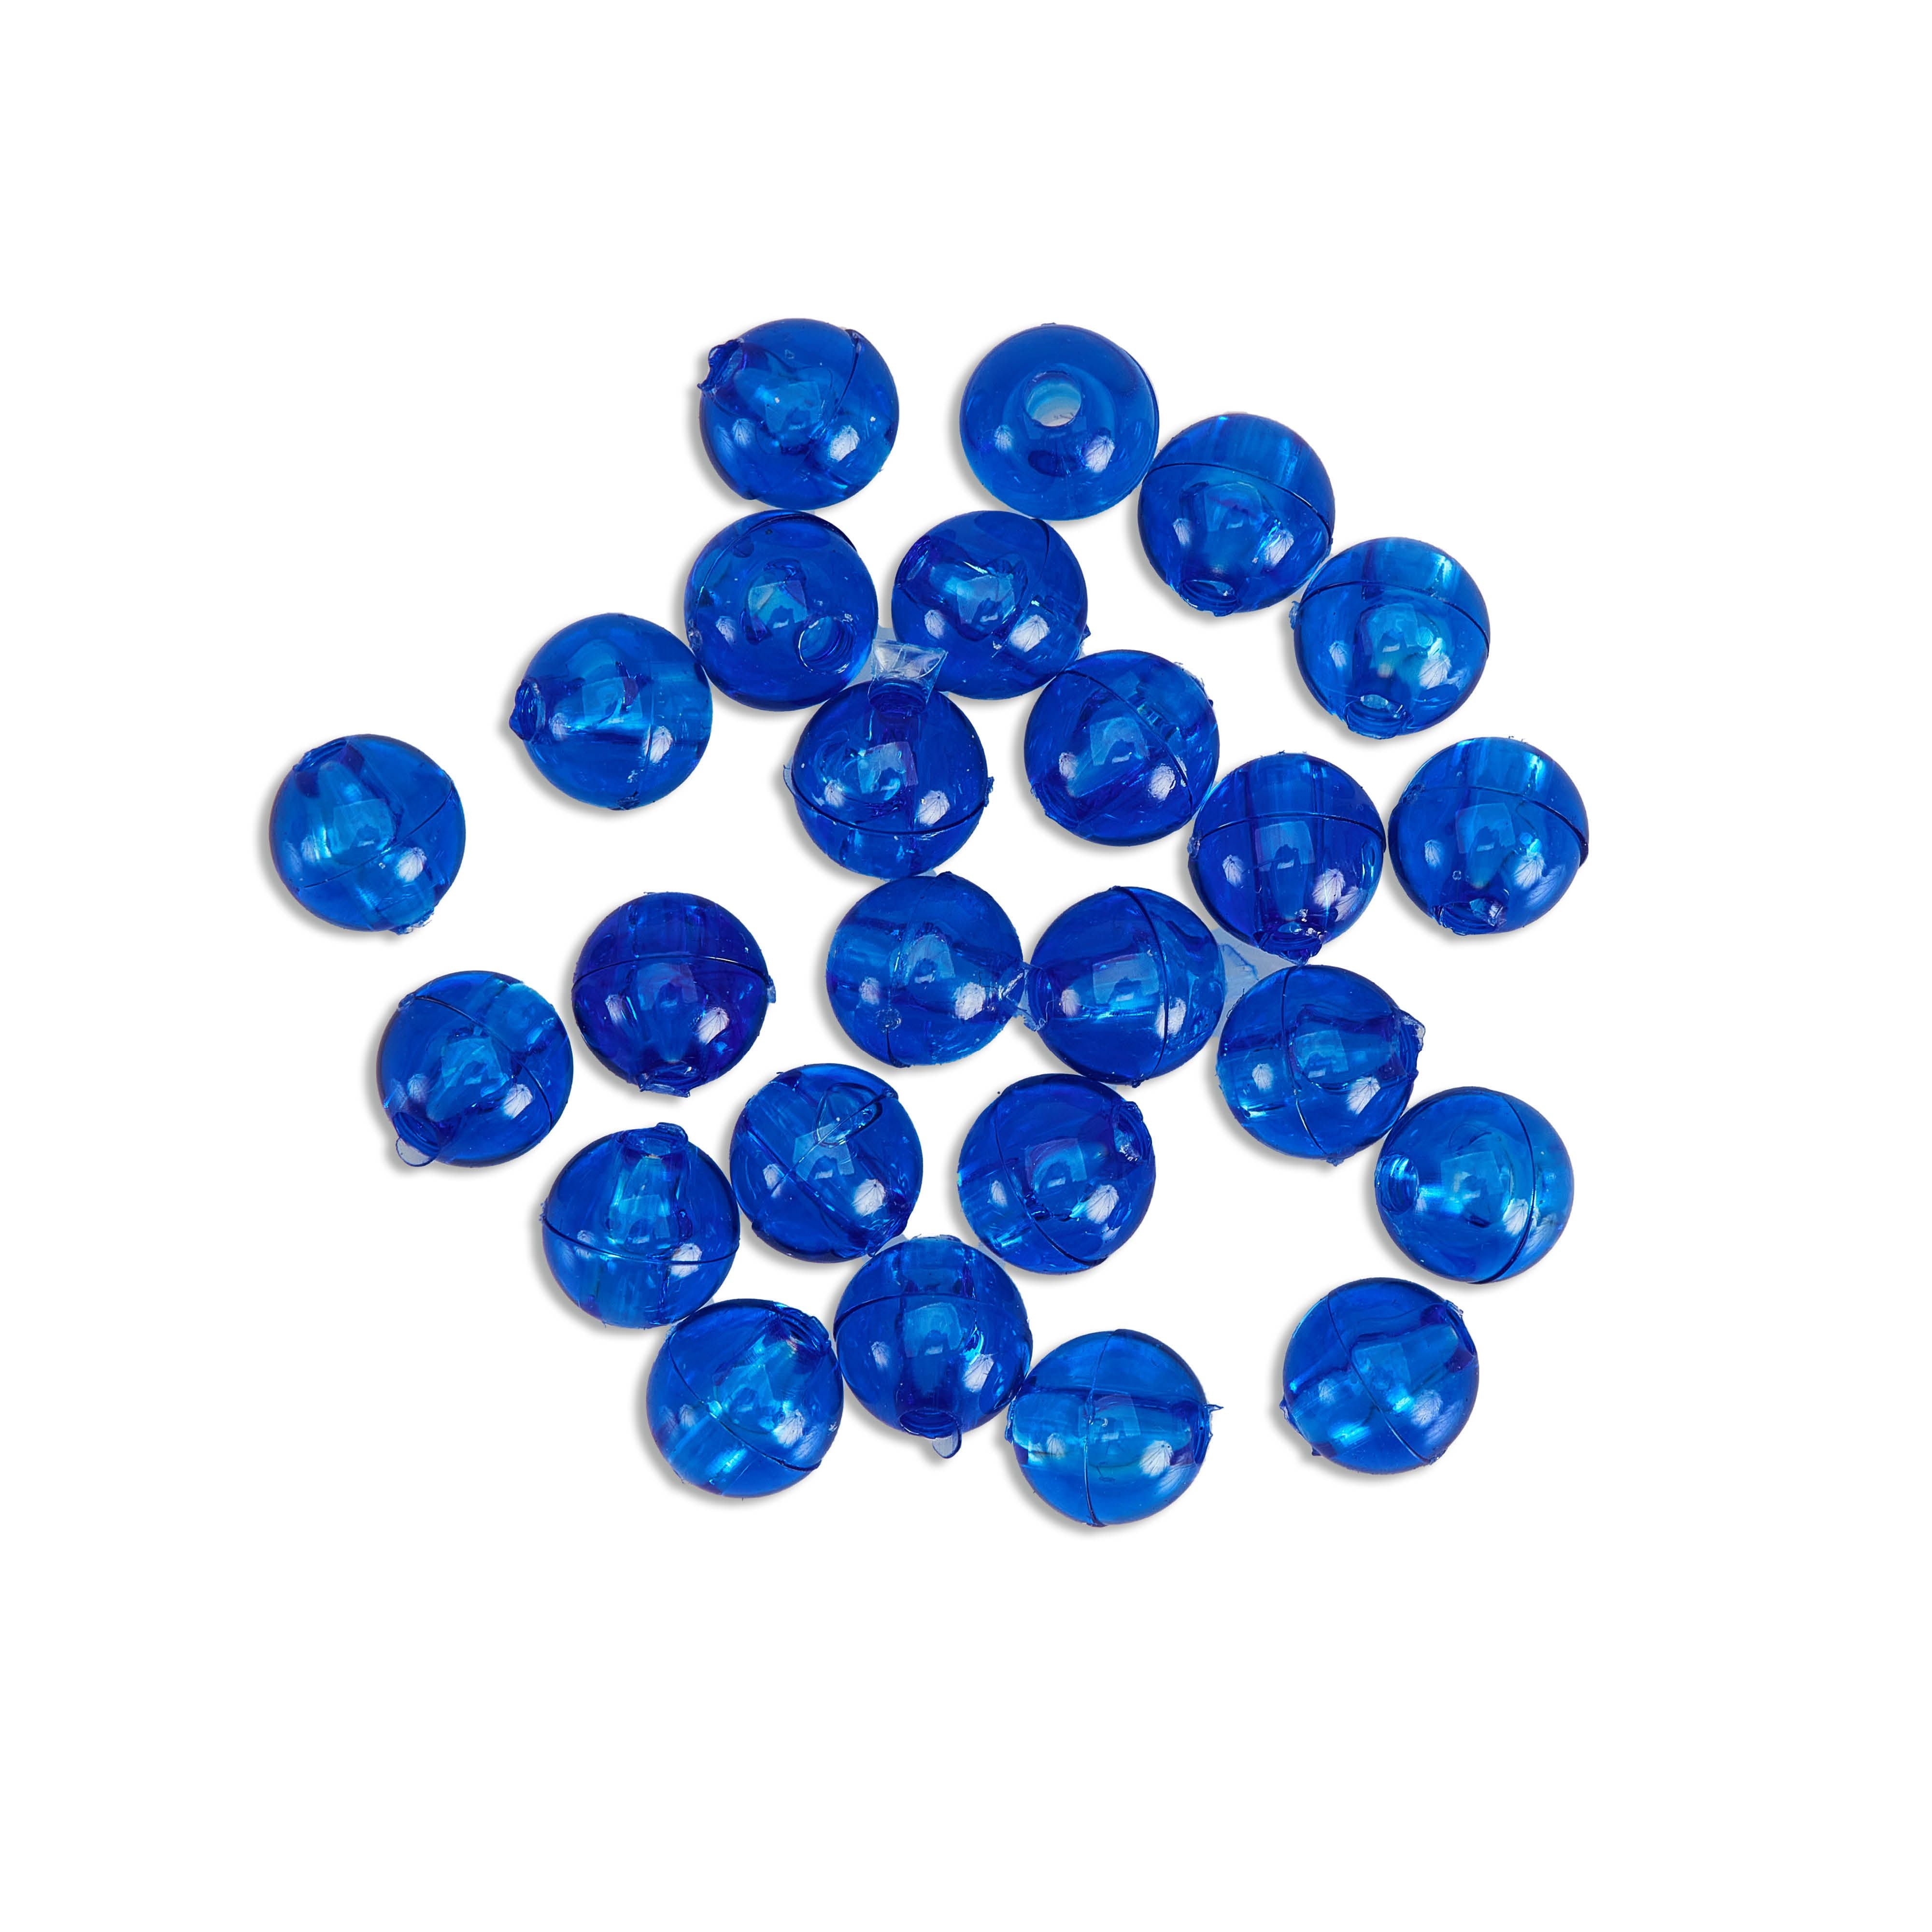 Clear Sapphire Blue 6MM Beads (20pack)